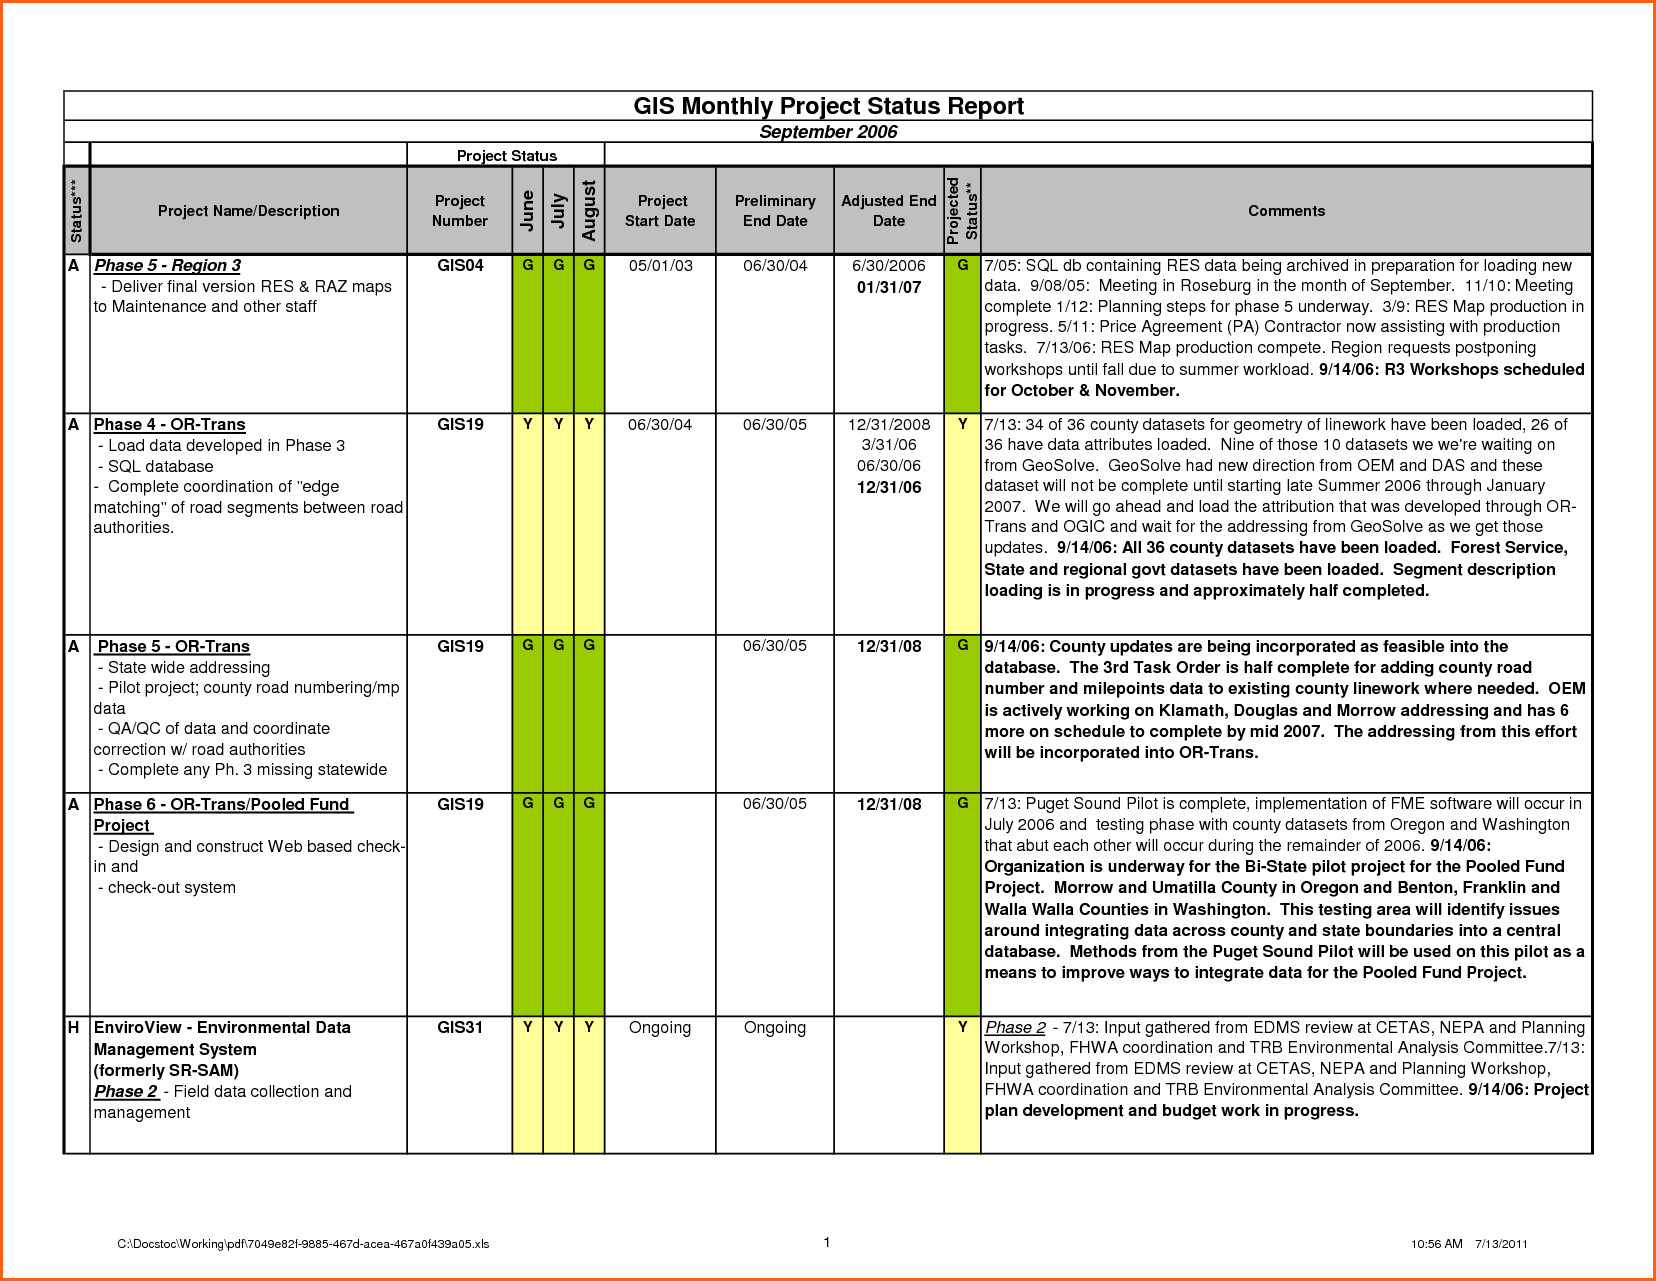 Project Status Report Template Excel Download Filetype Xls Intended For Project Status Report Template Excel Download Filetype Xls